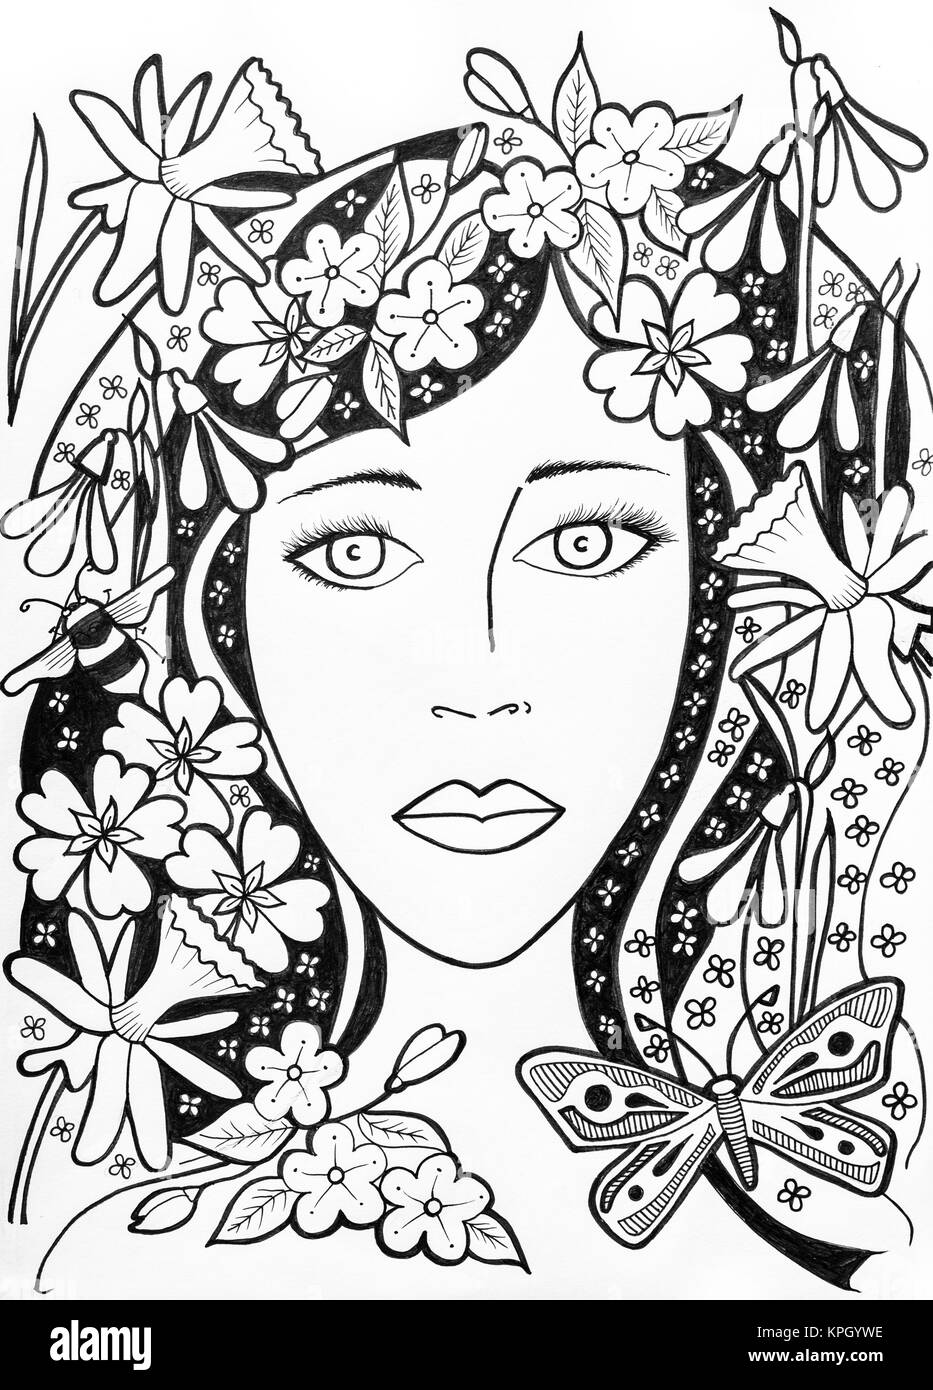 Hand drawn ink Illustration of a young femaile face with Spring seasonal hair decoration. Stock Photo